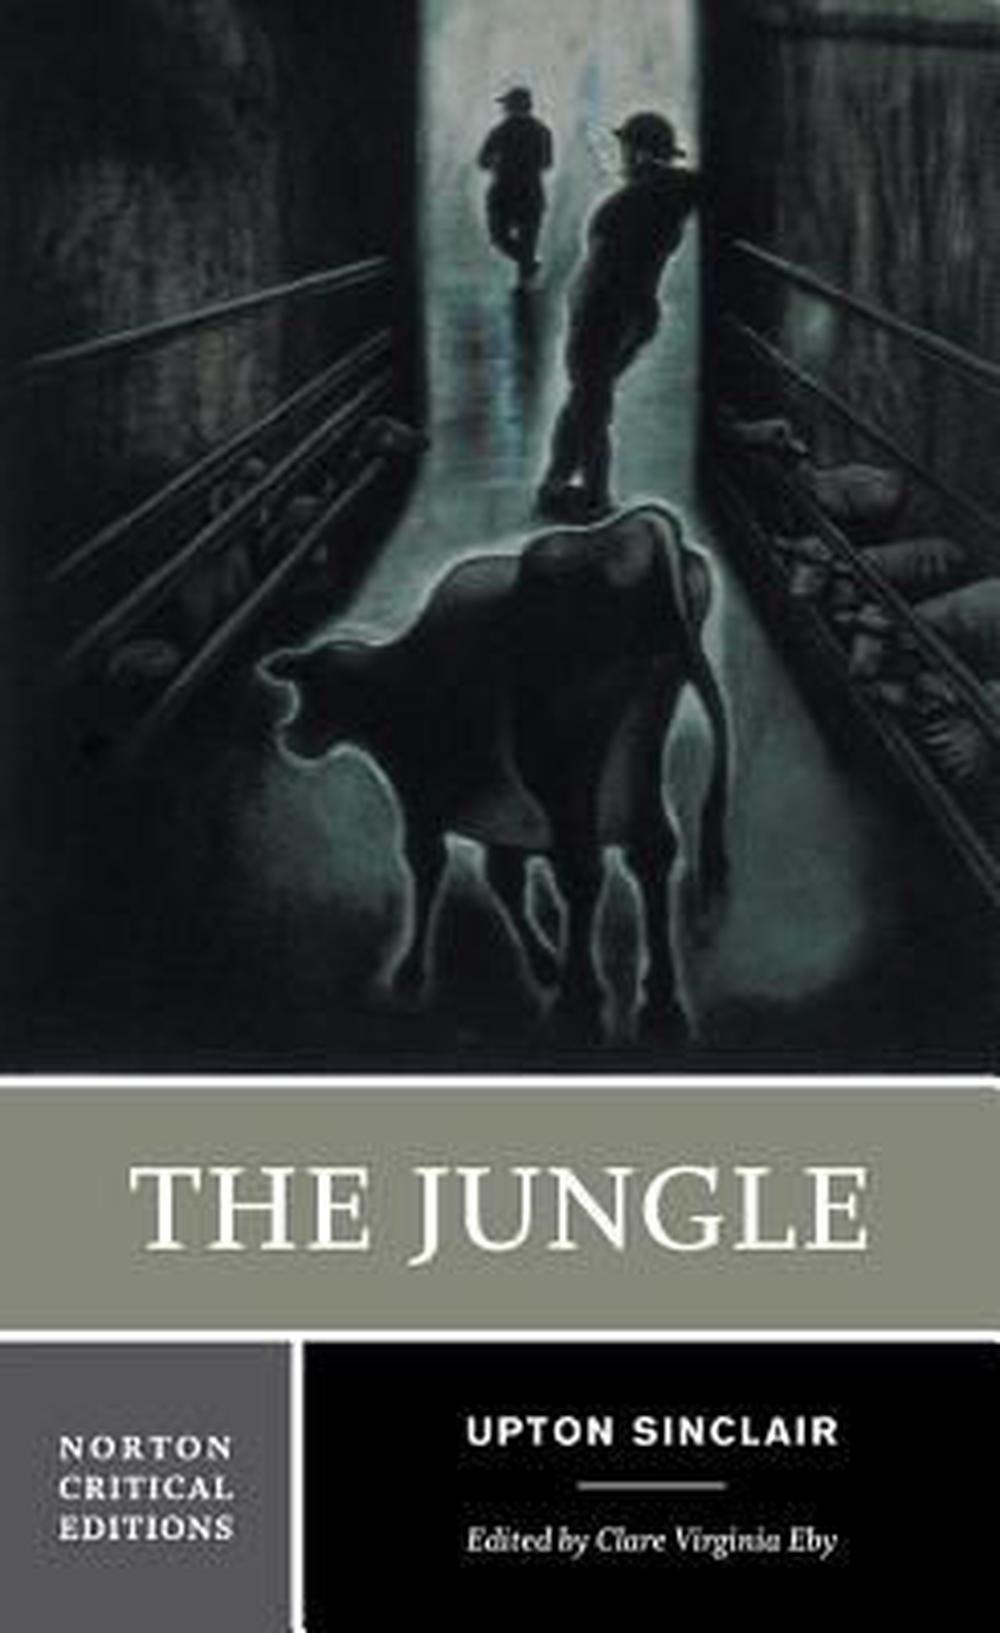 book review of the jungle by upton sinclair